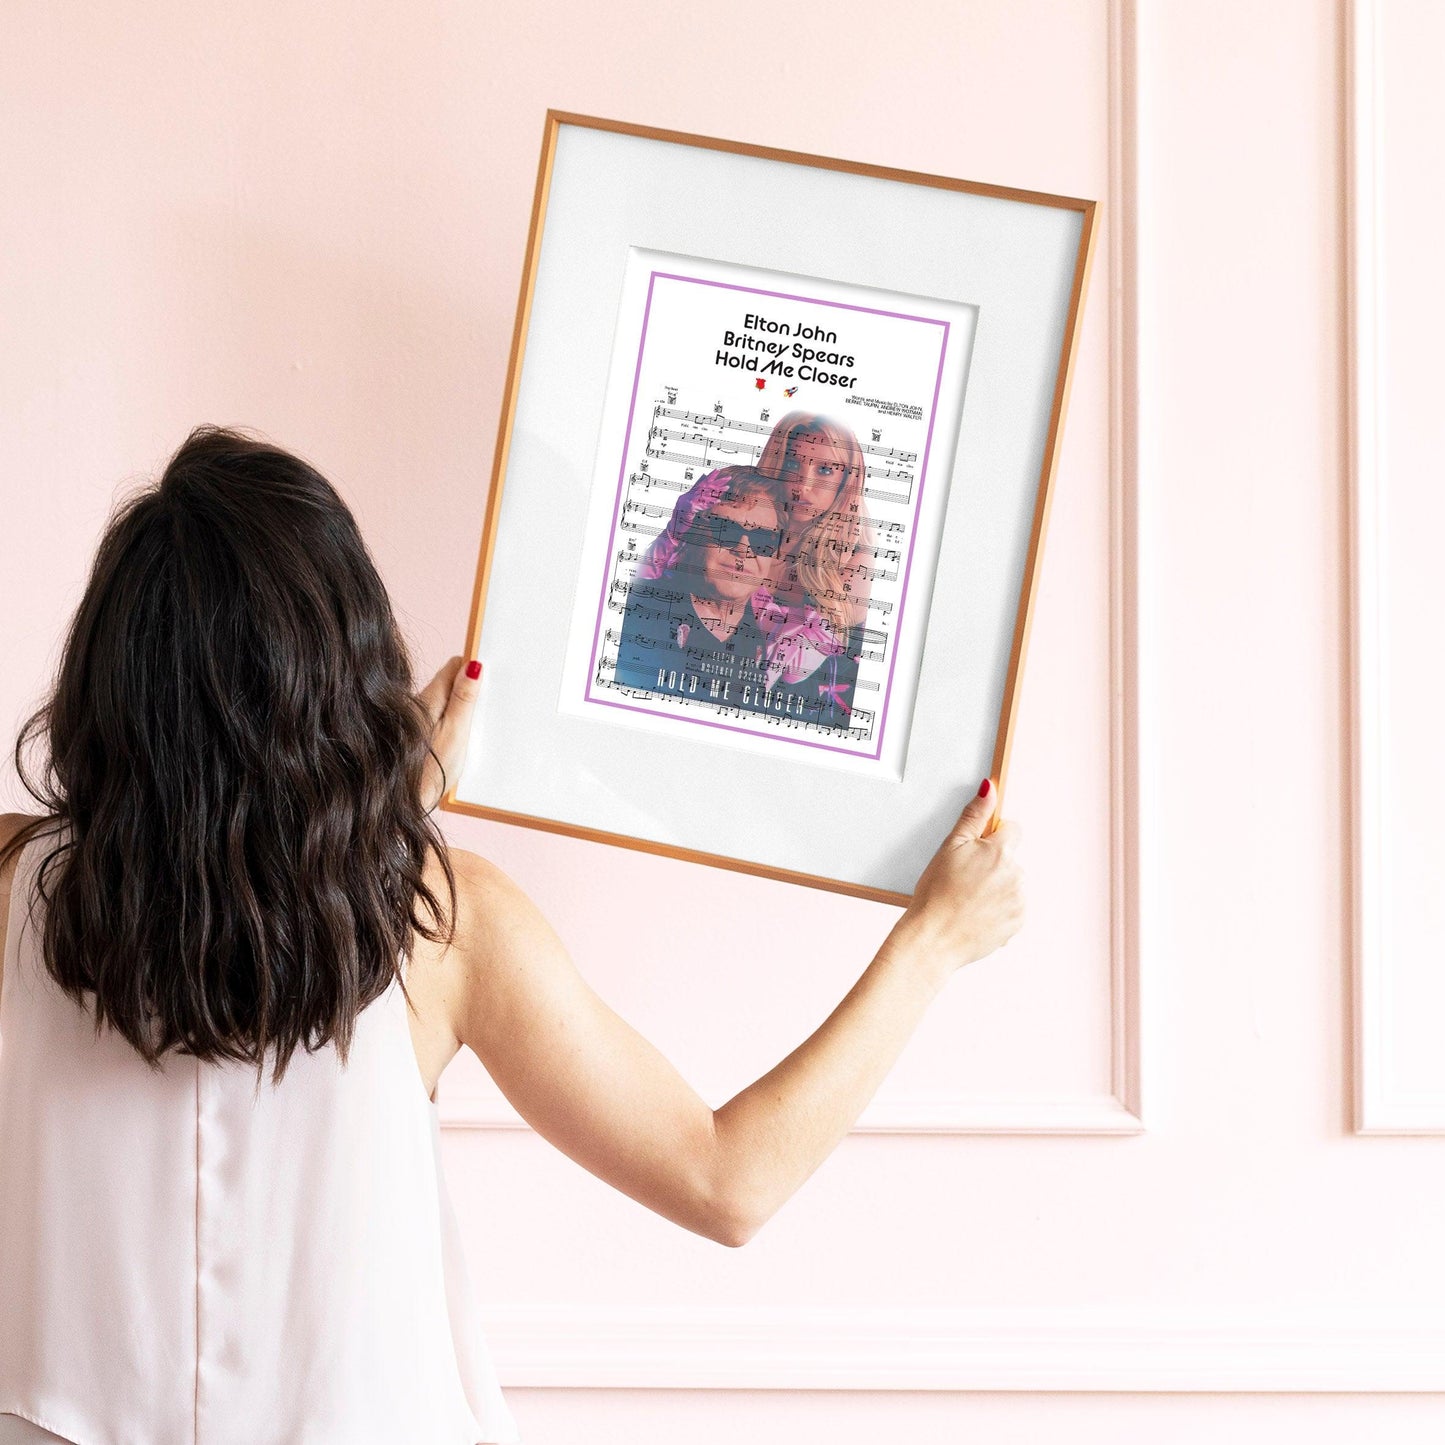 Looking for some amazing wall art to enhance your home? Check out the Elton John, Britney Spears - Hold Me Closer Poster from 98Types. This poster is perfect for adding some musical flair to your home. Plus, it's a great way to show your support for two of the most iconic pop stars of our generation.